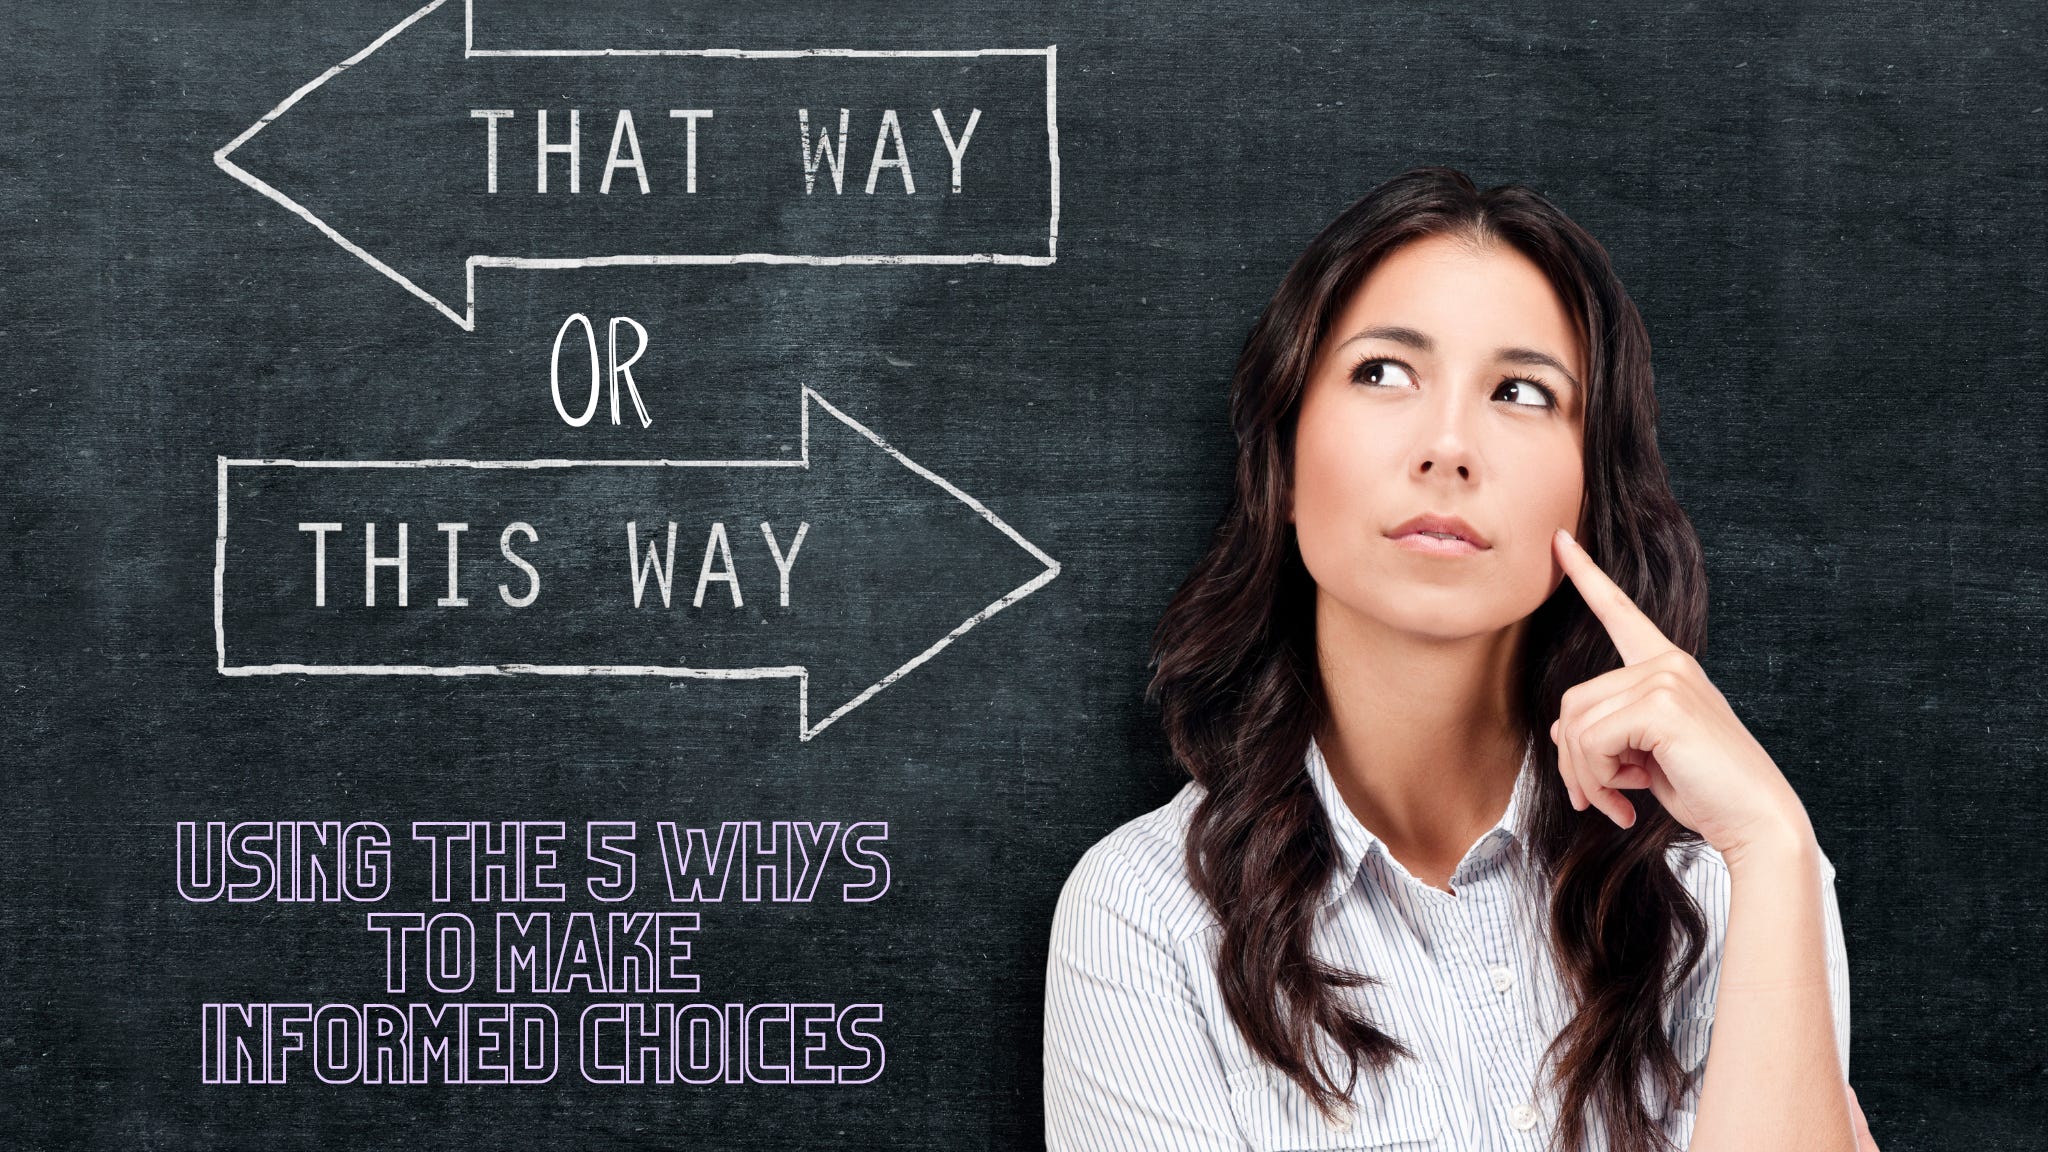 black background with woman on right, eyes pointed upward and index finger pointed to her cheek. White outlined arrows on left. One says "that way" and the other says "this way" with the word "or" in between the 2 arrows. At the bottom in purple block letters is "Using the 5 Whys to Make Informed Choices."